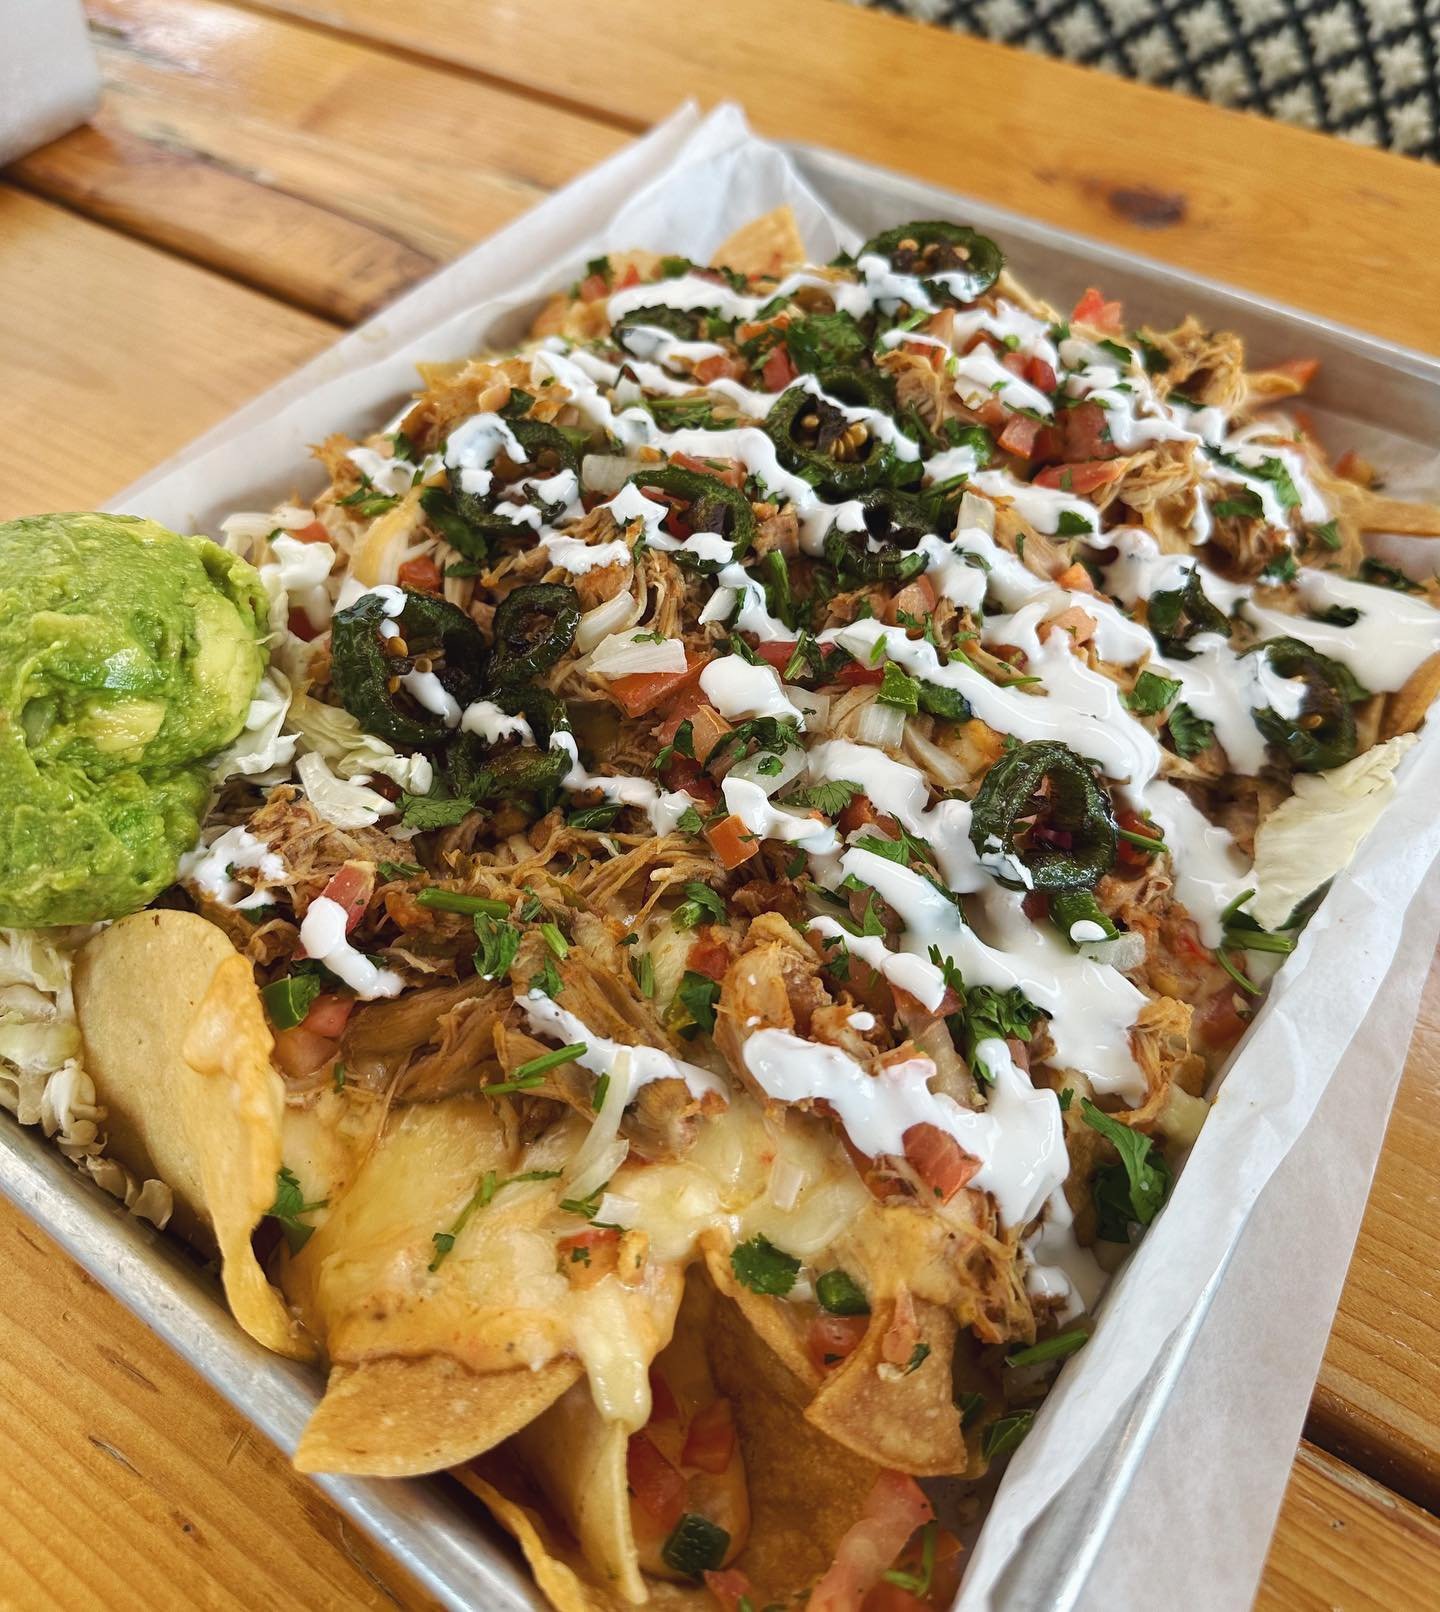 House-made chips, queso blanco, melted chihuahua cheese, pico, grilled jalape&ntilde;os, guacamole &amp; your choice of protein&hellip; $10 all day today! Grab a friend, we&rsquo;ll see y&rsquo;all on the patio 🍻